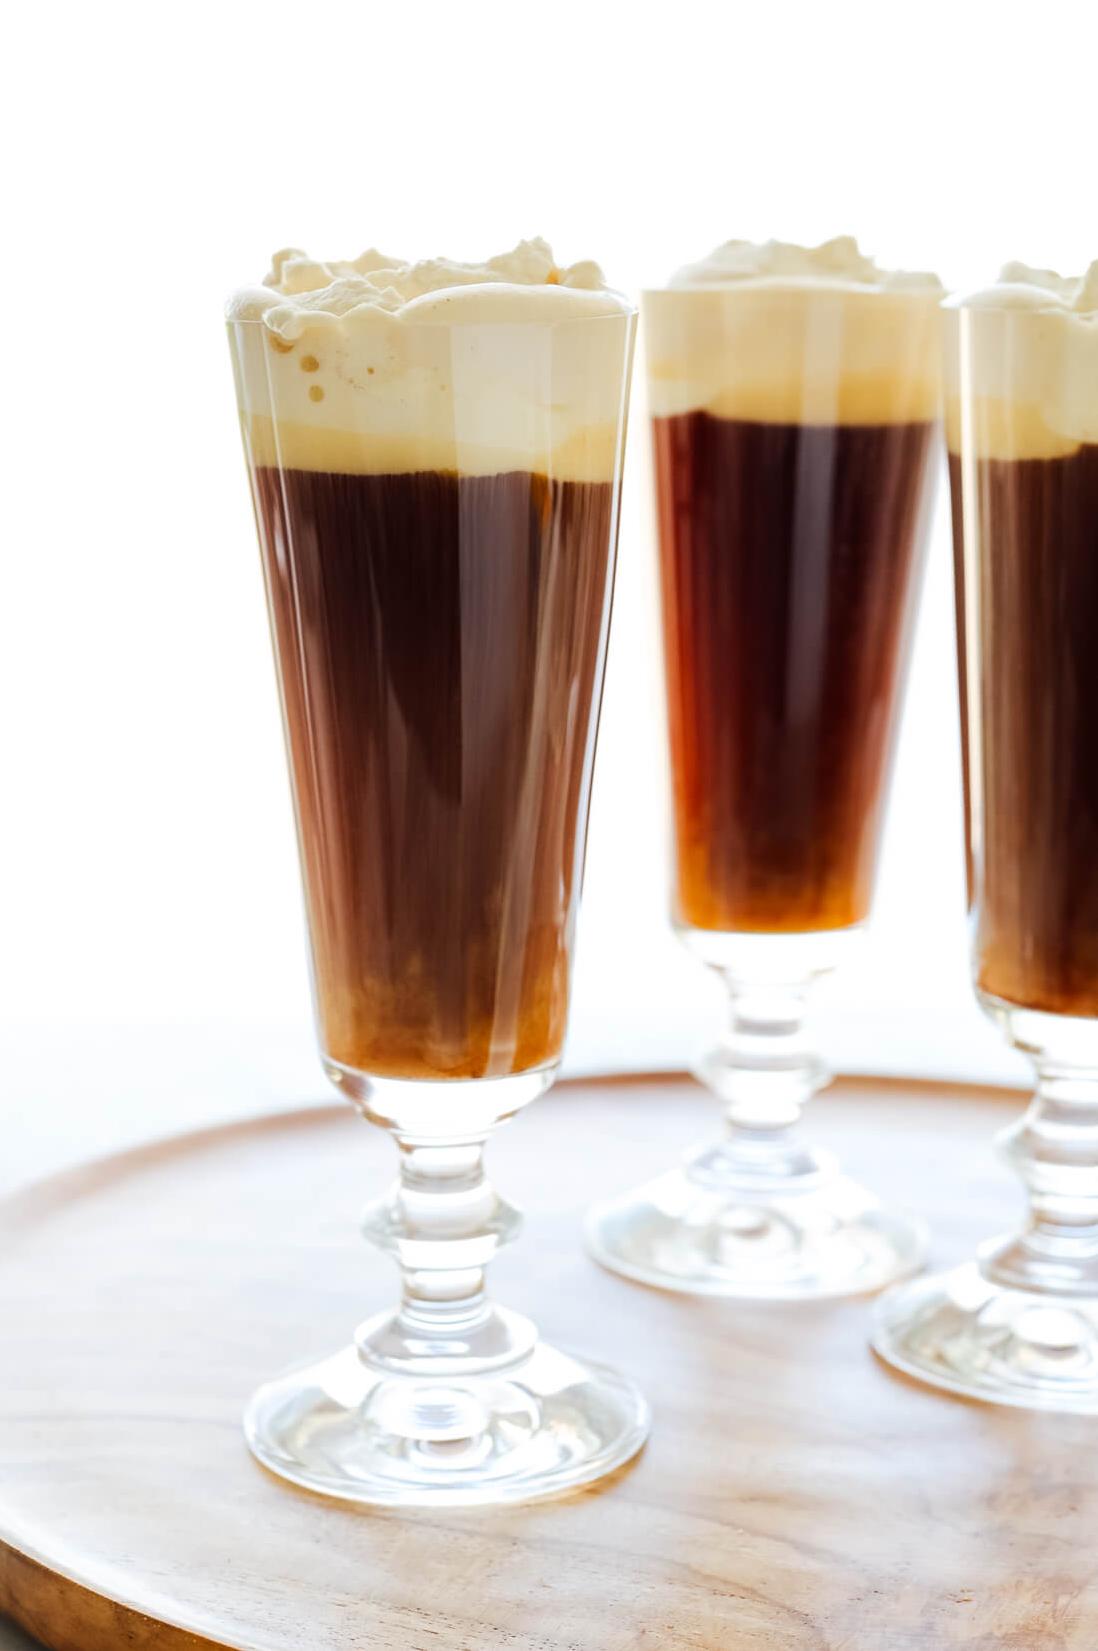  Ready to mix things up with your daily cup of coffee? Try this recipe!